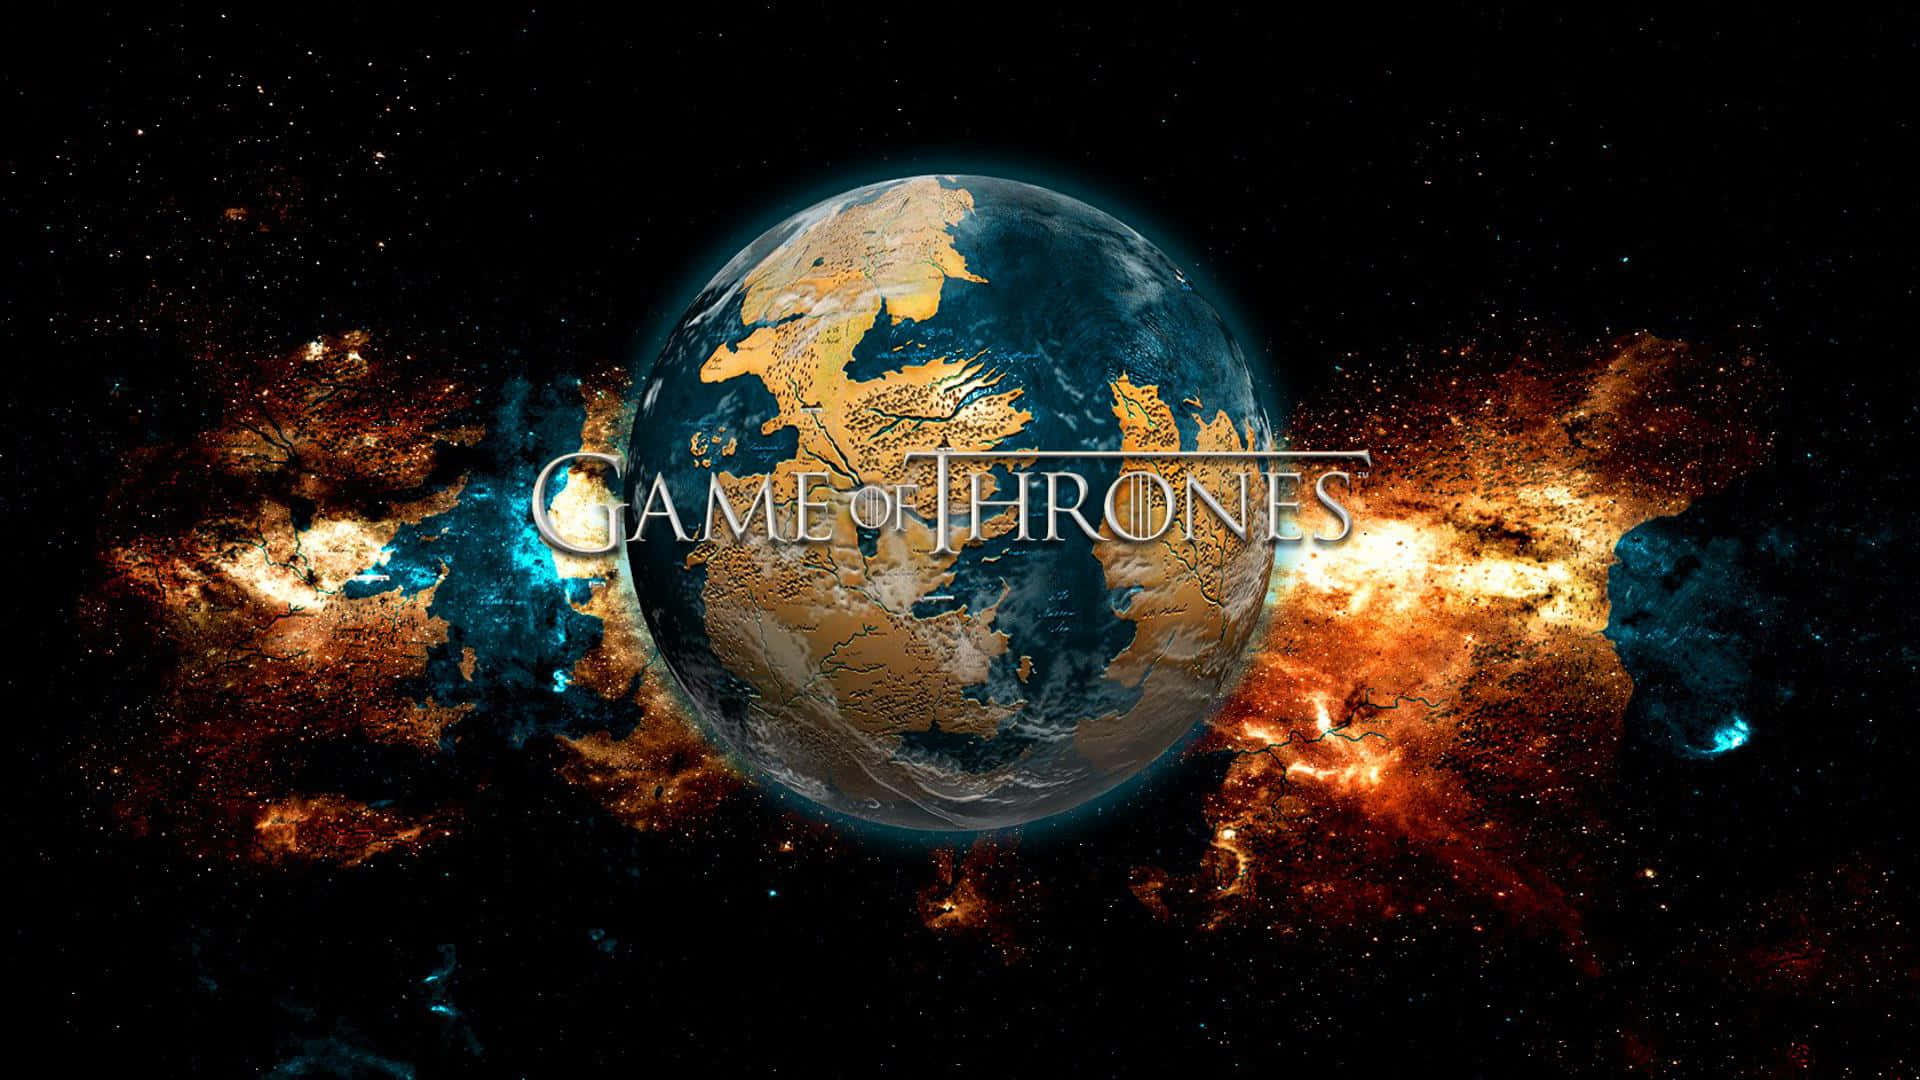 Power is Everything in the Game of Thrones